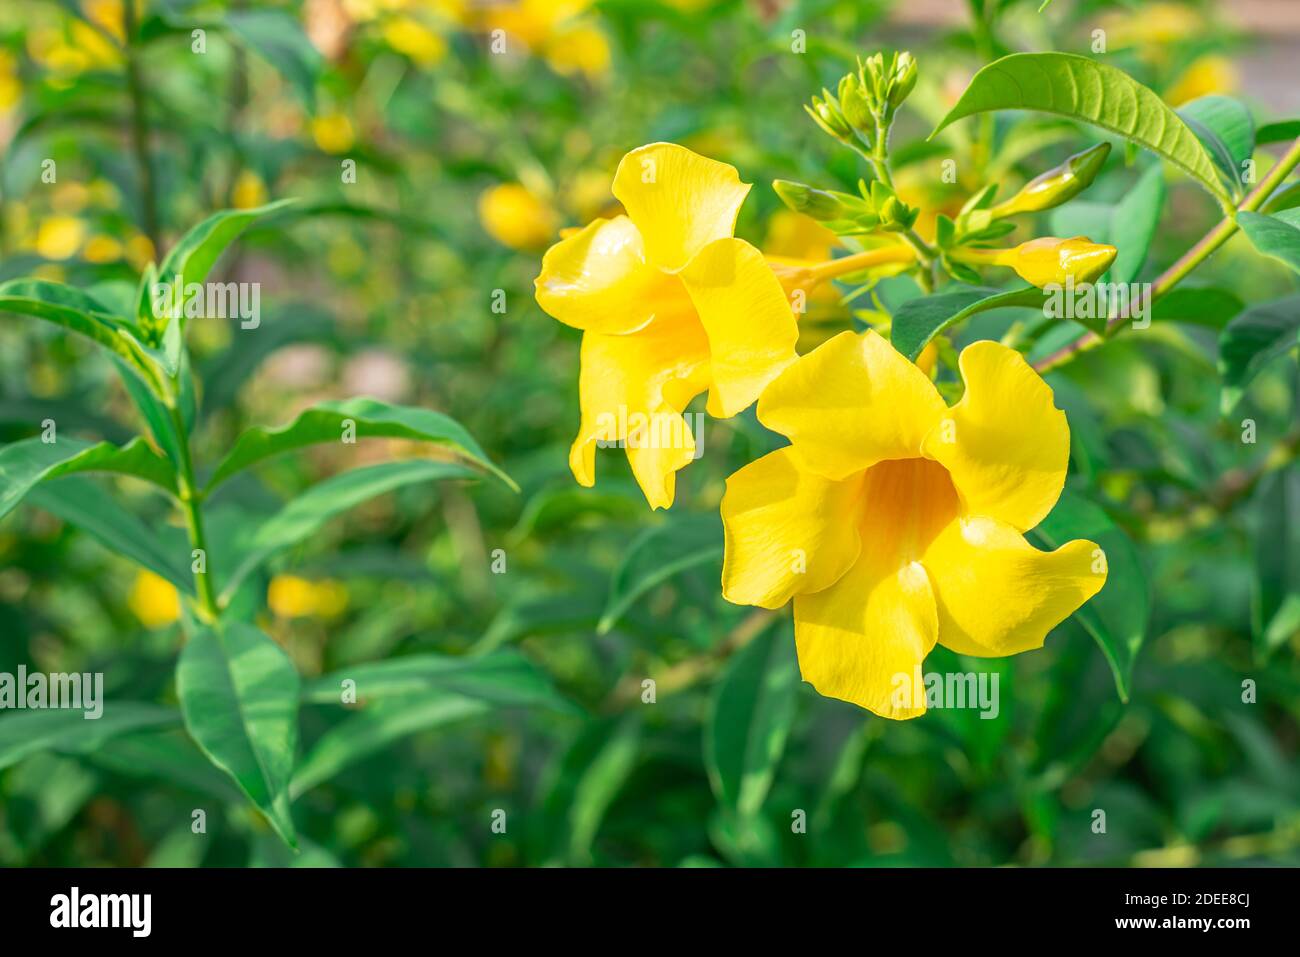 Caesalpinia flower on blurred green leaf background, Caesalpinia is a genus of flowering plants in the legume family Stock Photo